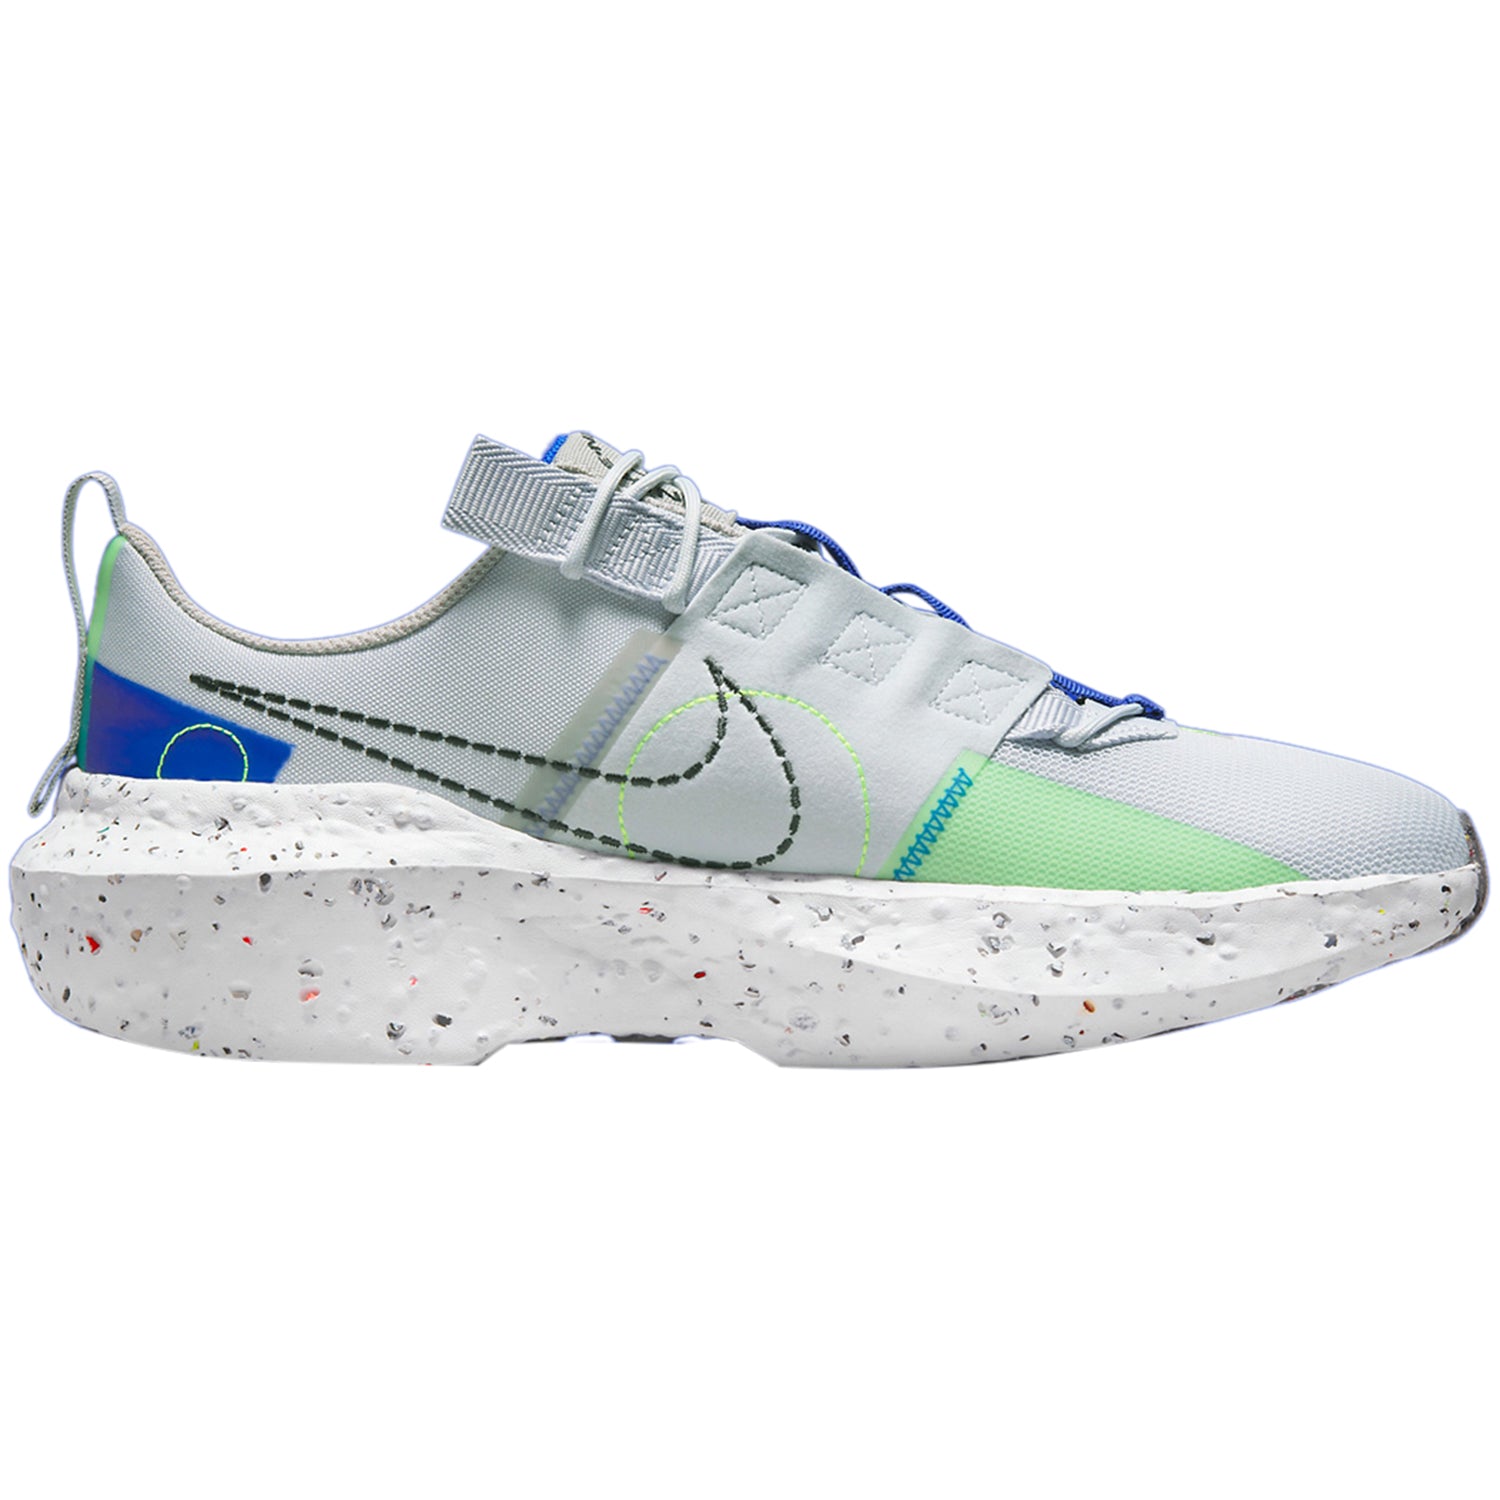 Nike Crater Impact Pure Platinum Electric Green